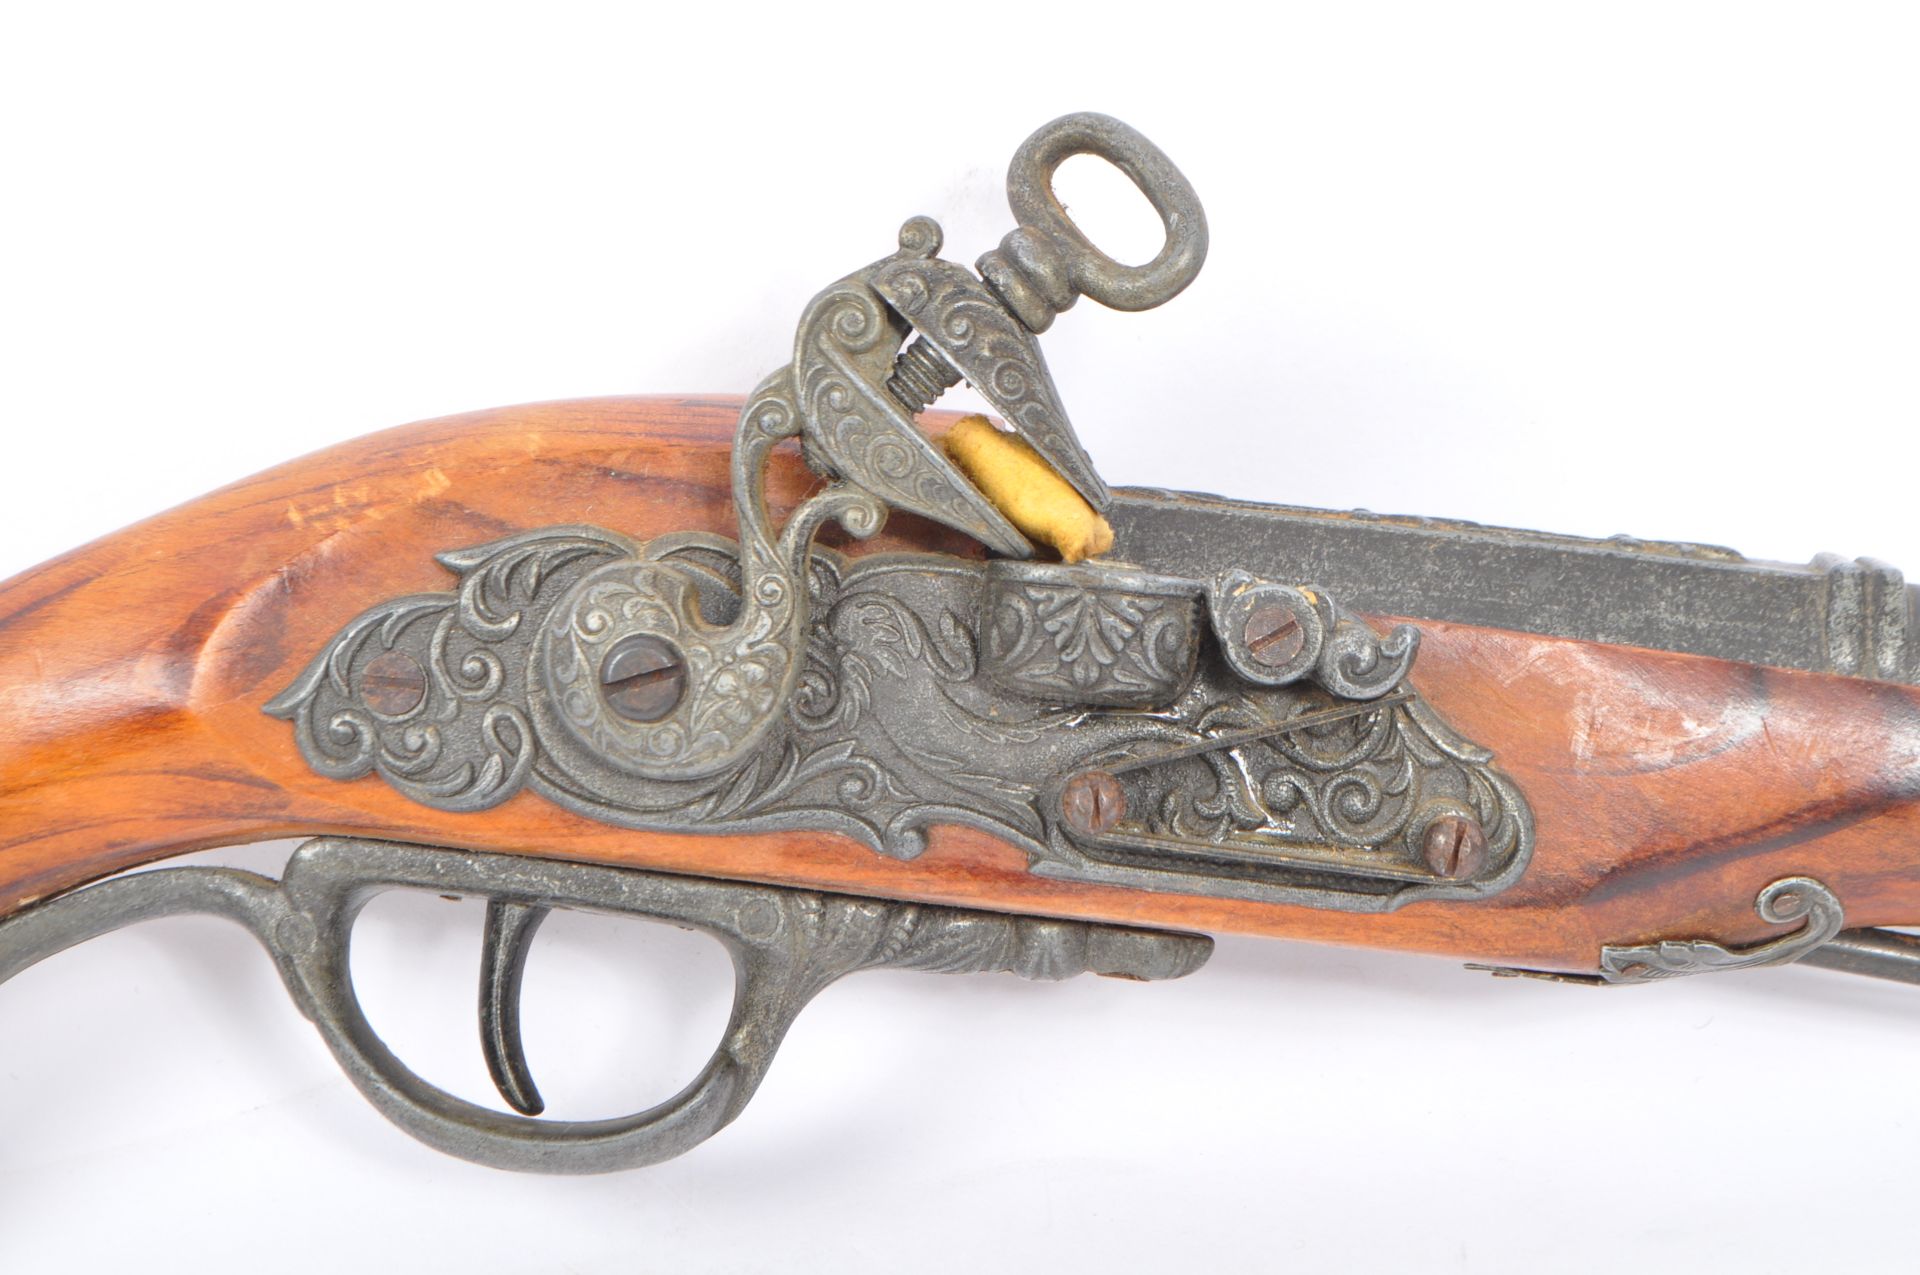 COLLECTION OF SIX REPRODUCTION FLINTLOCK 18TH CENTURY PISTOLS - Image 8 of 9